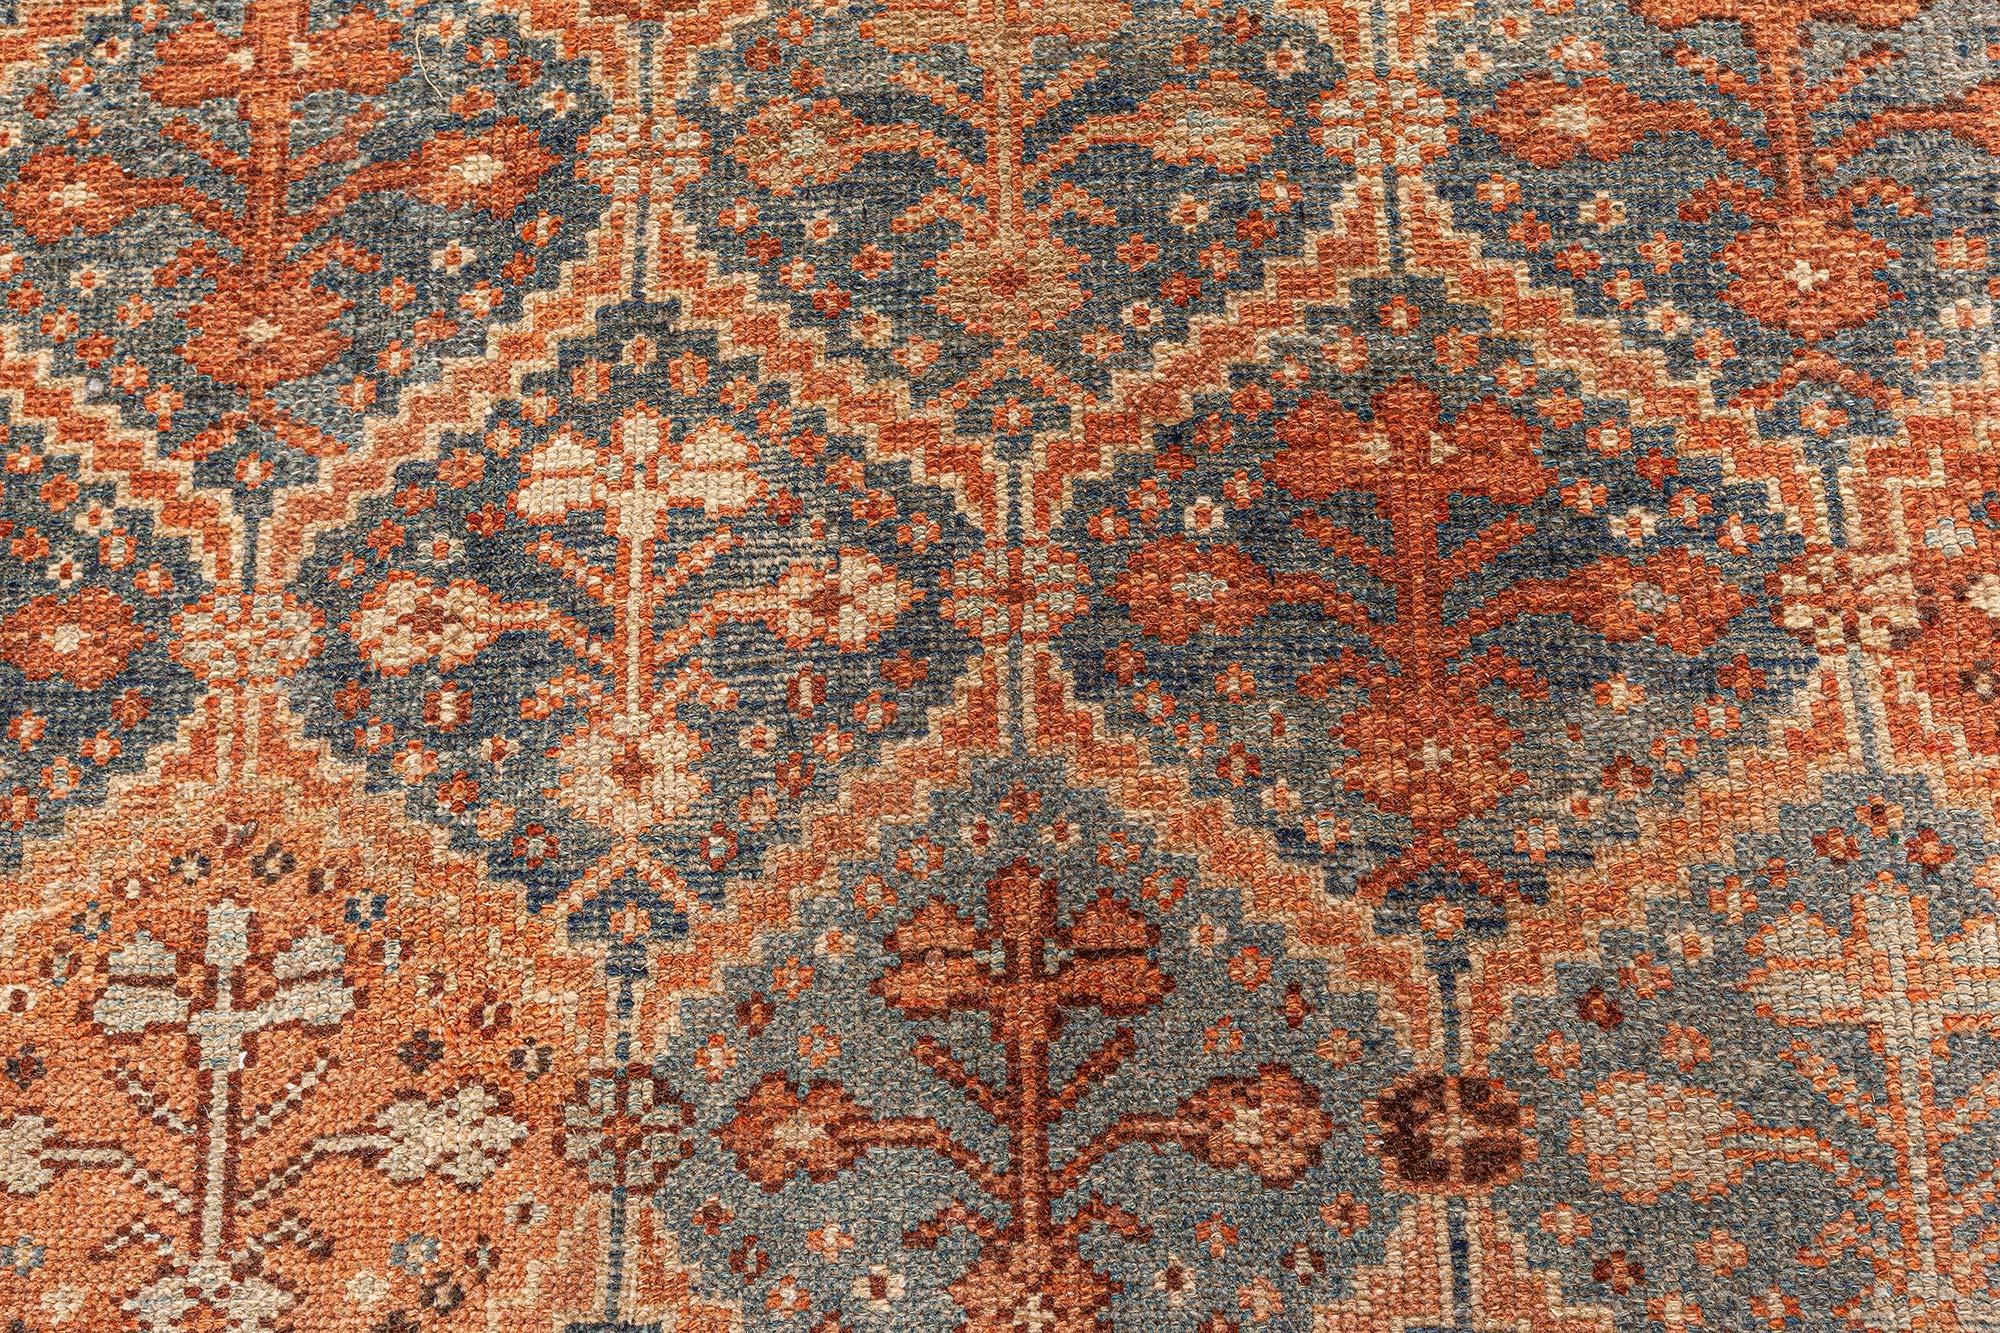 19th century Persian Malayer orange, rust, brown and cool blue-grey hand-knotted wool runner
Size: 11'1